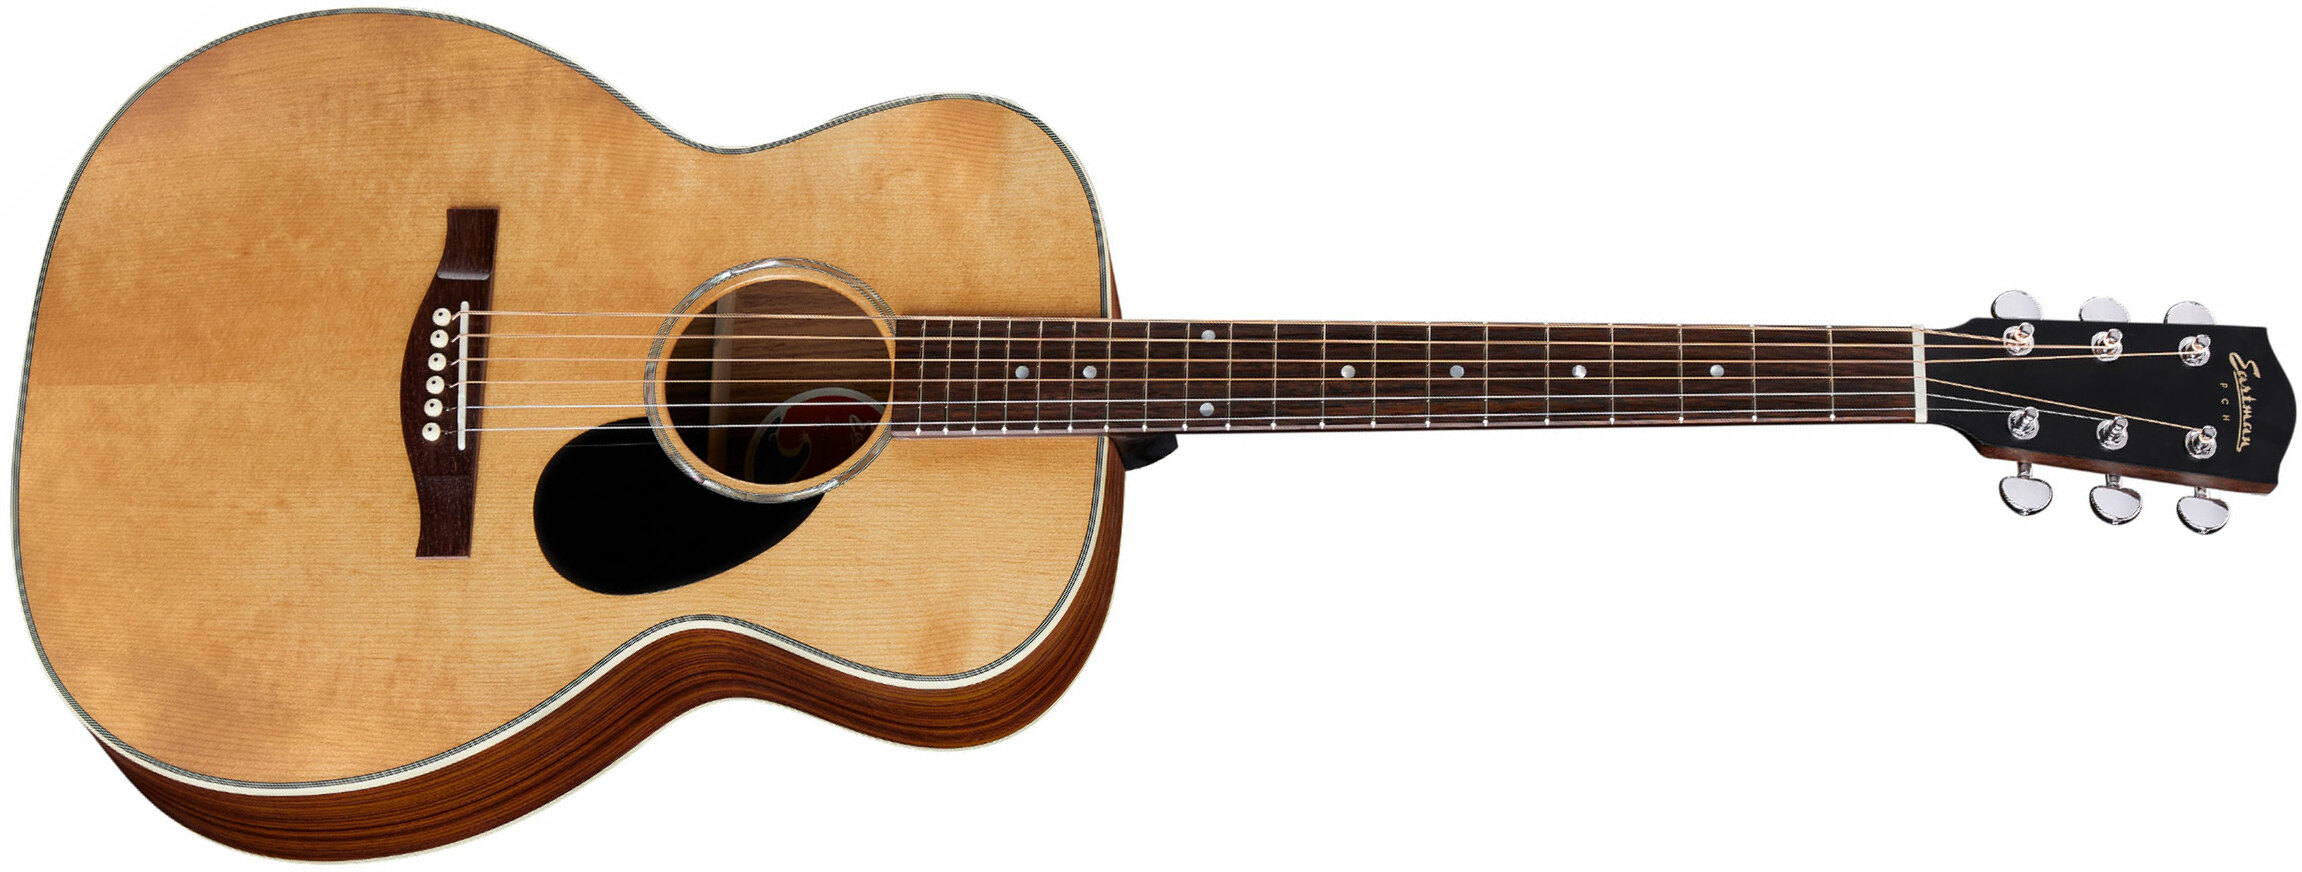 Eastman Pch2-om Orchestra Model Epicea Palissandre Rw - Truetone Natural Satin - Acoustic guitar & electro - Main picture